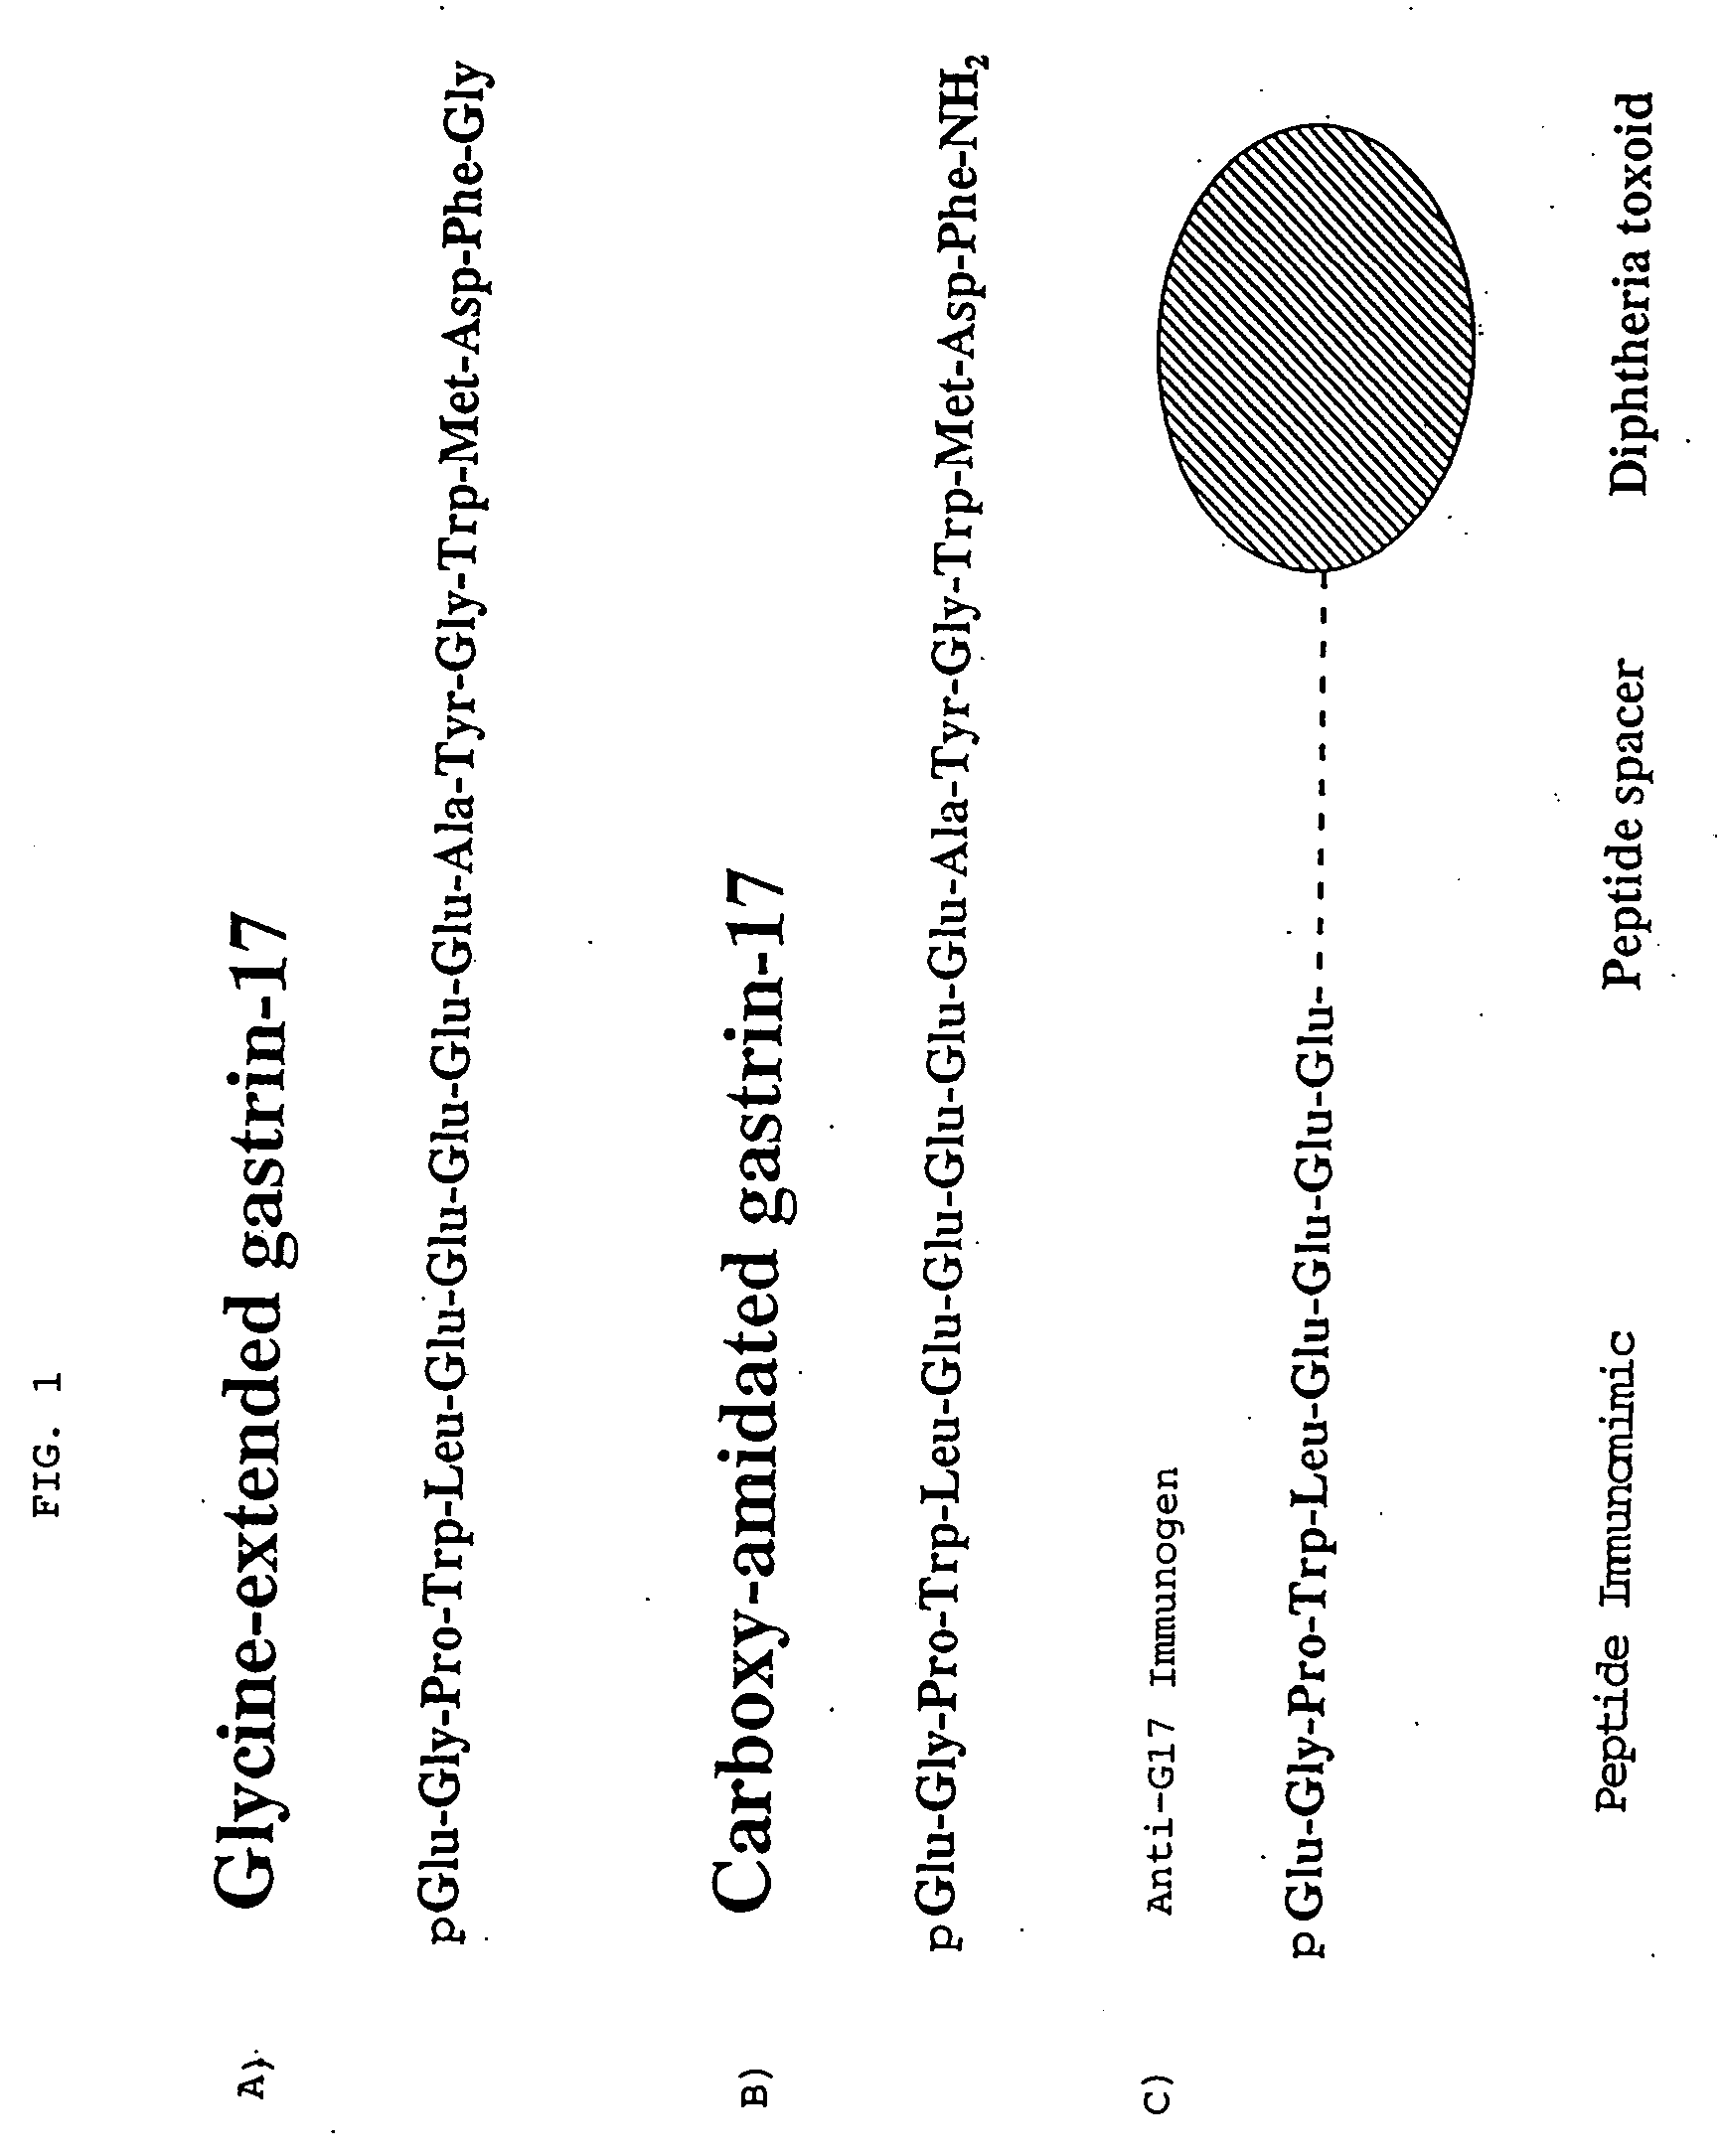 Immunological methods for the treatment of gastrointestinal cancer